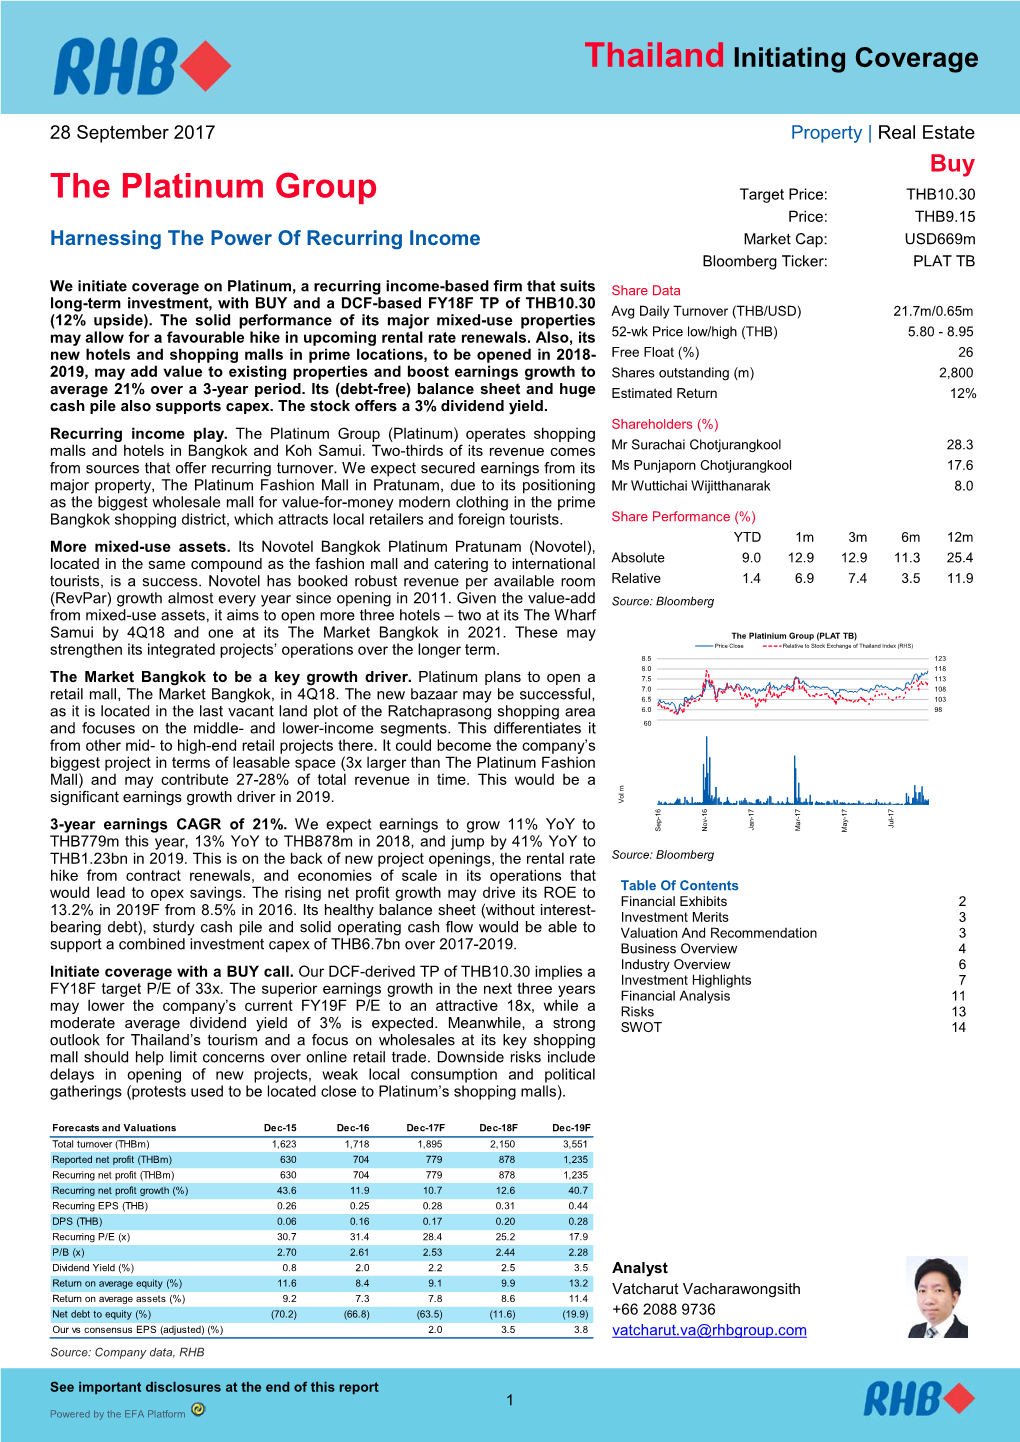 The Platinum Group Target Price: THB10.30 Price: THB9.15 Harnessing the Power of Recurring Income Market Cap: Usd669m Bloomberg Ticker: PLAT TB